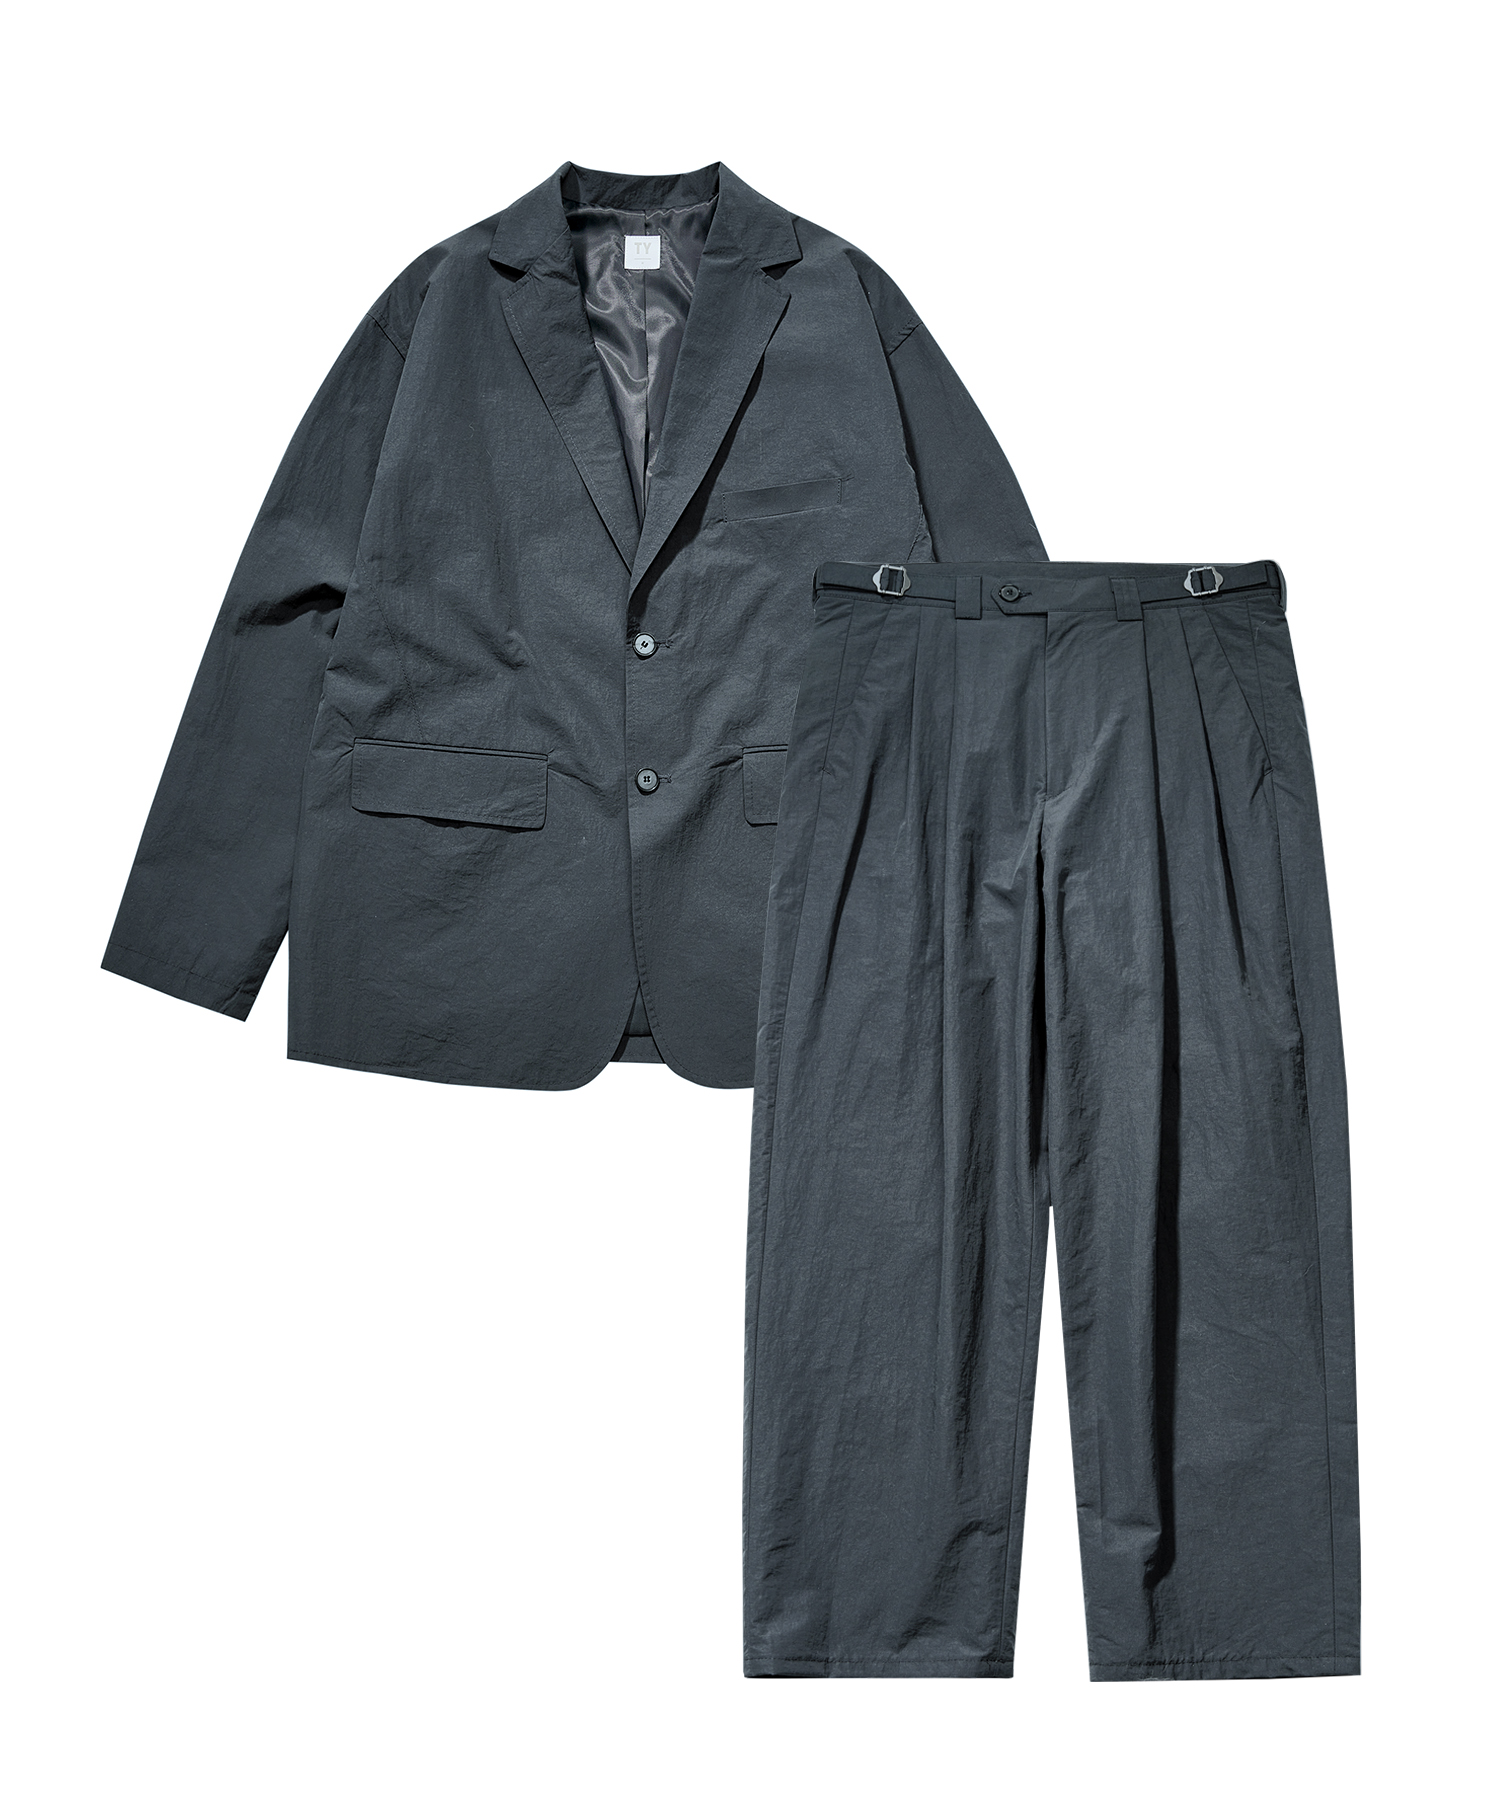 Office casual sports two button jacket setup_Charcoal